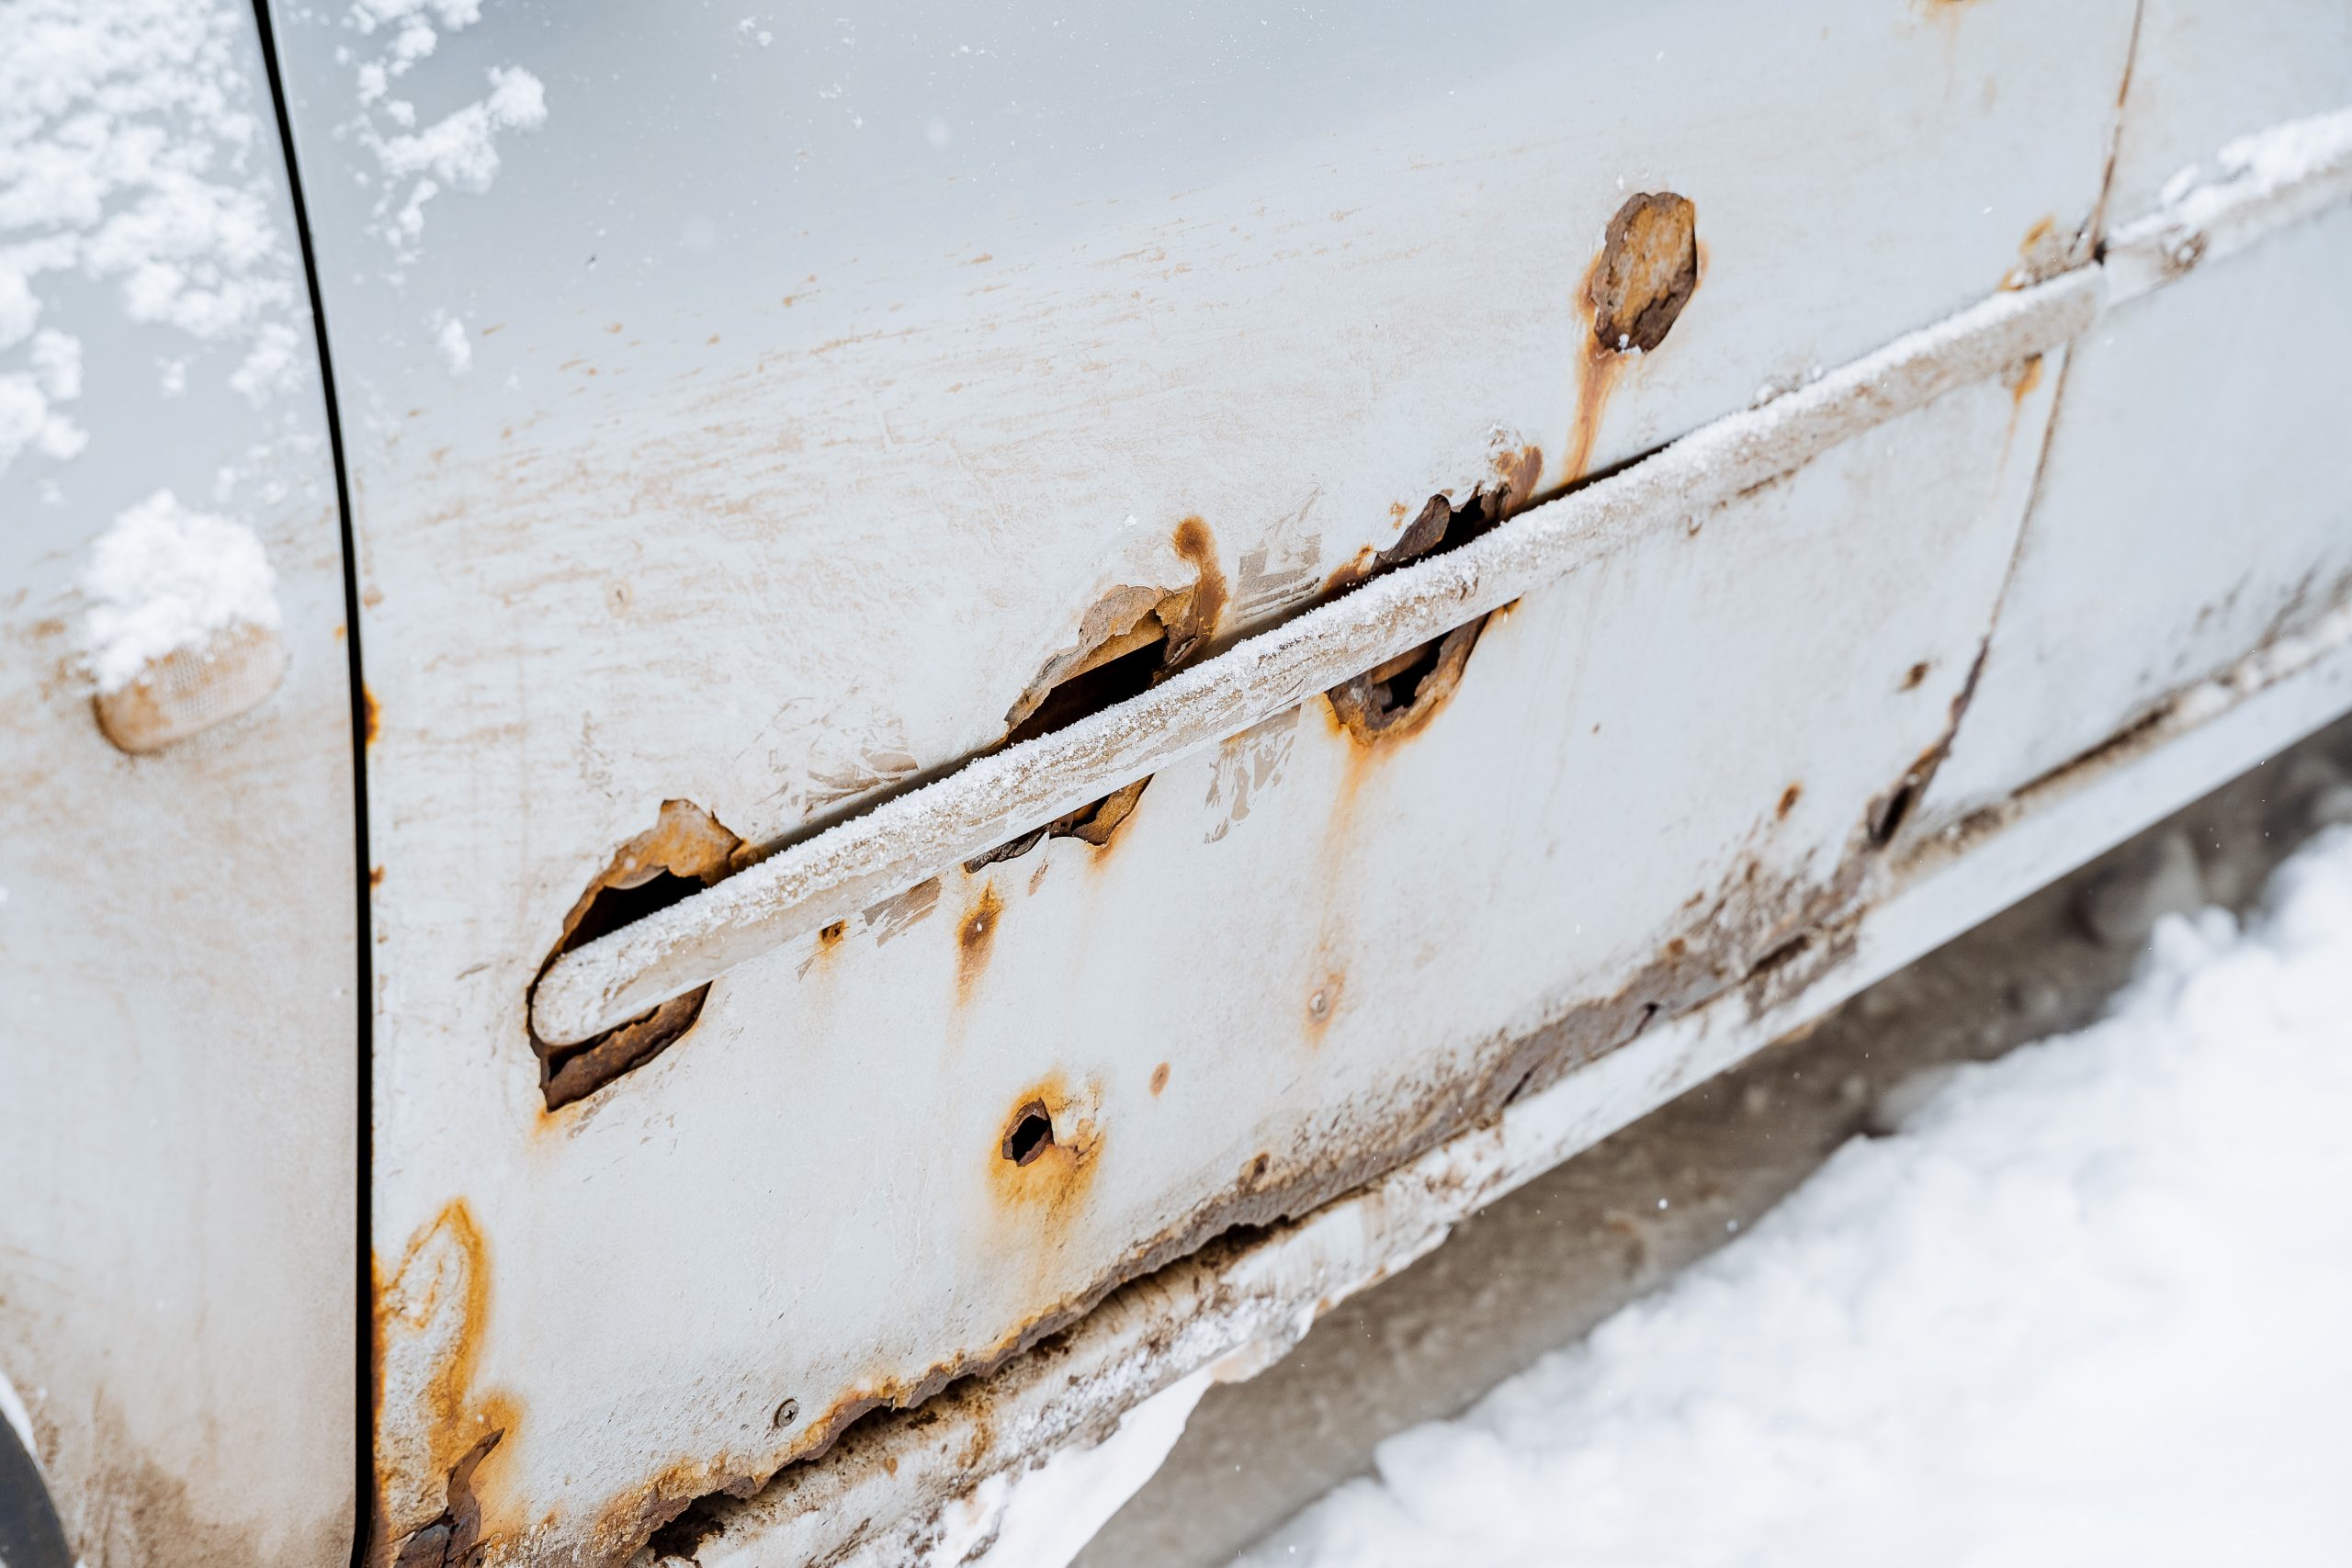 Rusted car sitting in snow